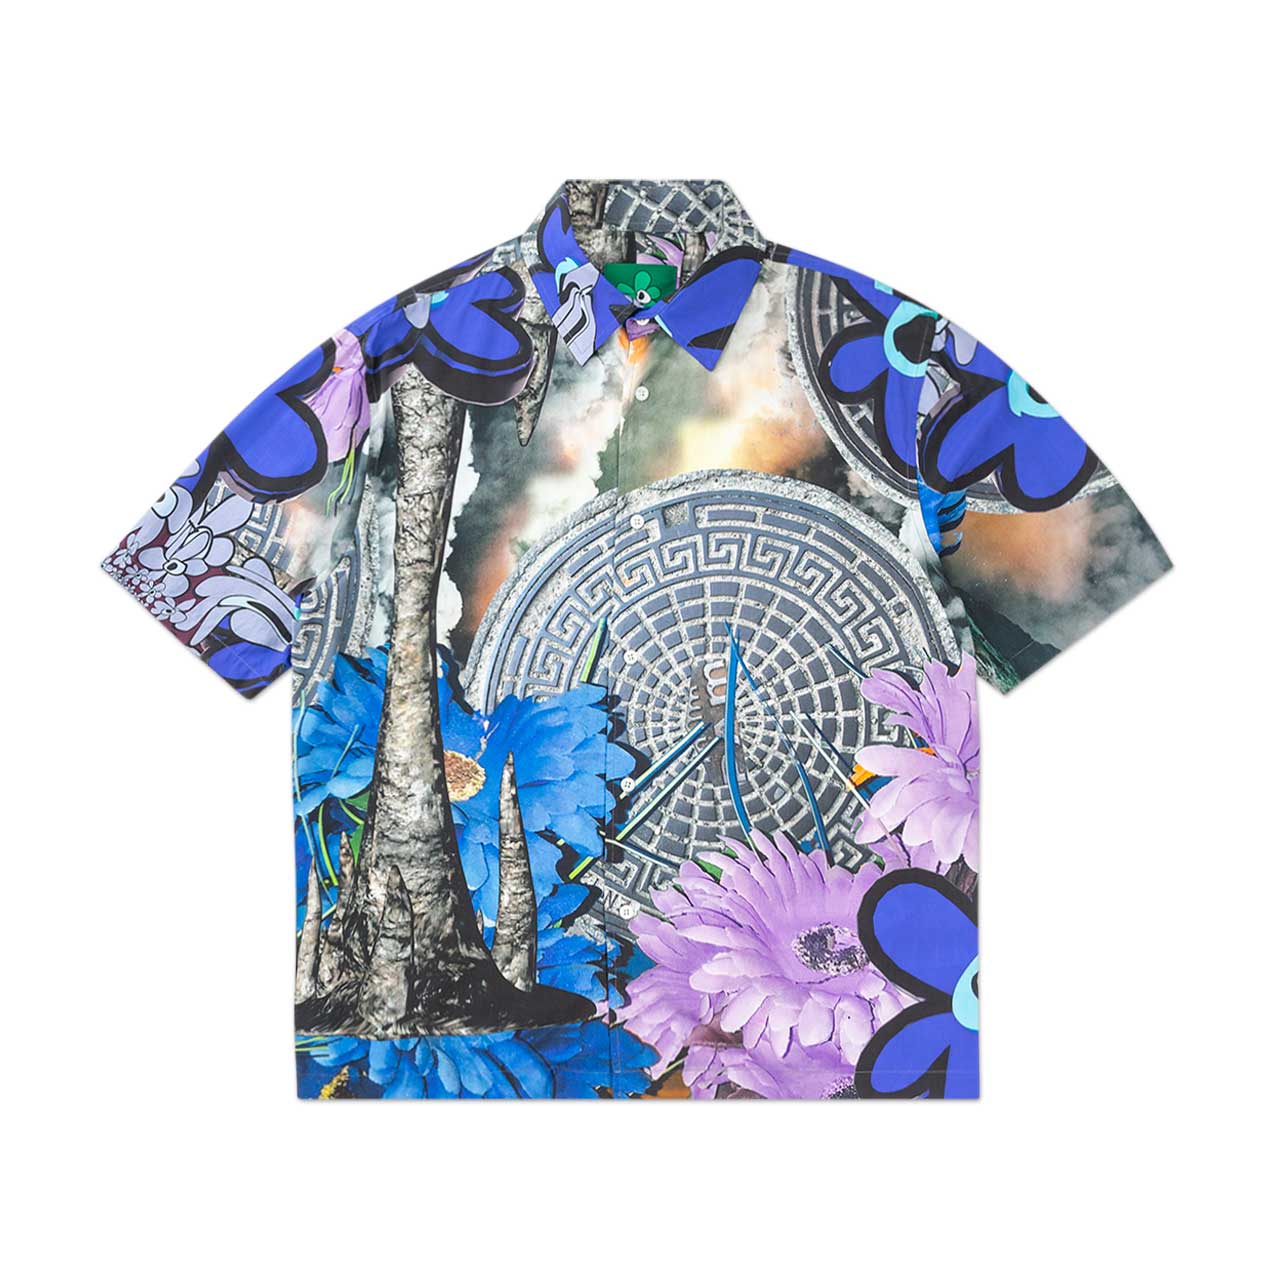 perks and mini the depths printed shirt (multi) - 3650-mlt - a.plus - Image - 1